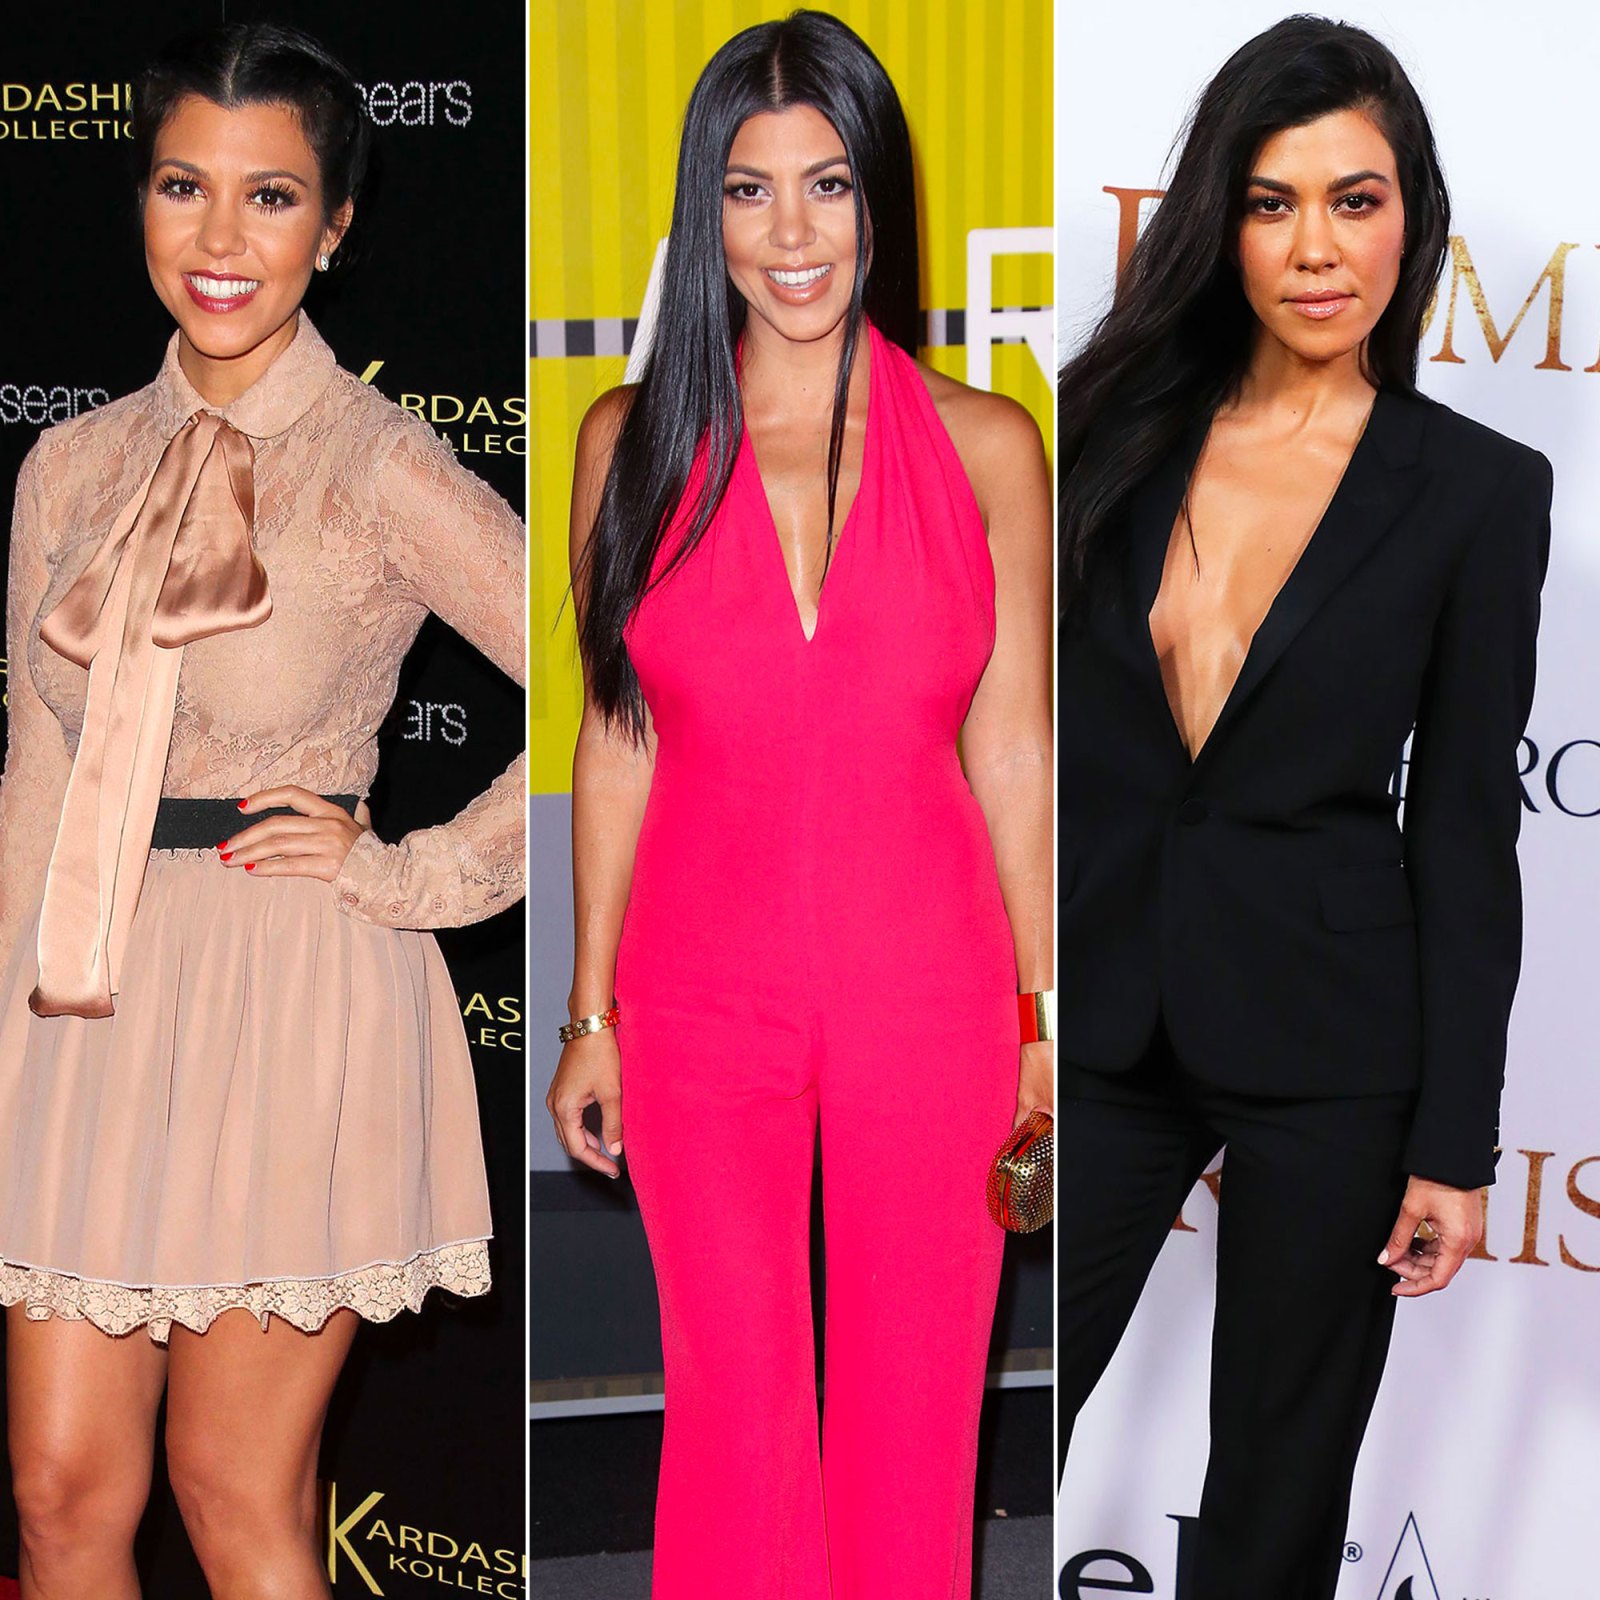 Proof That Kourtney Kardashian’s Style Is the Most Interesting to Look At